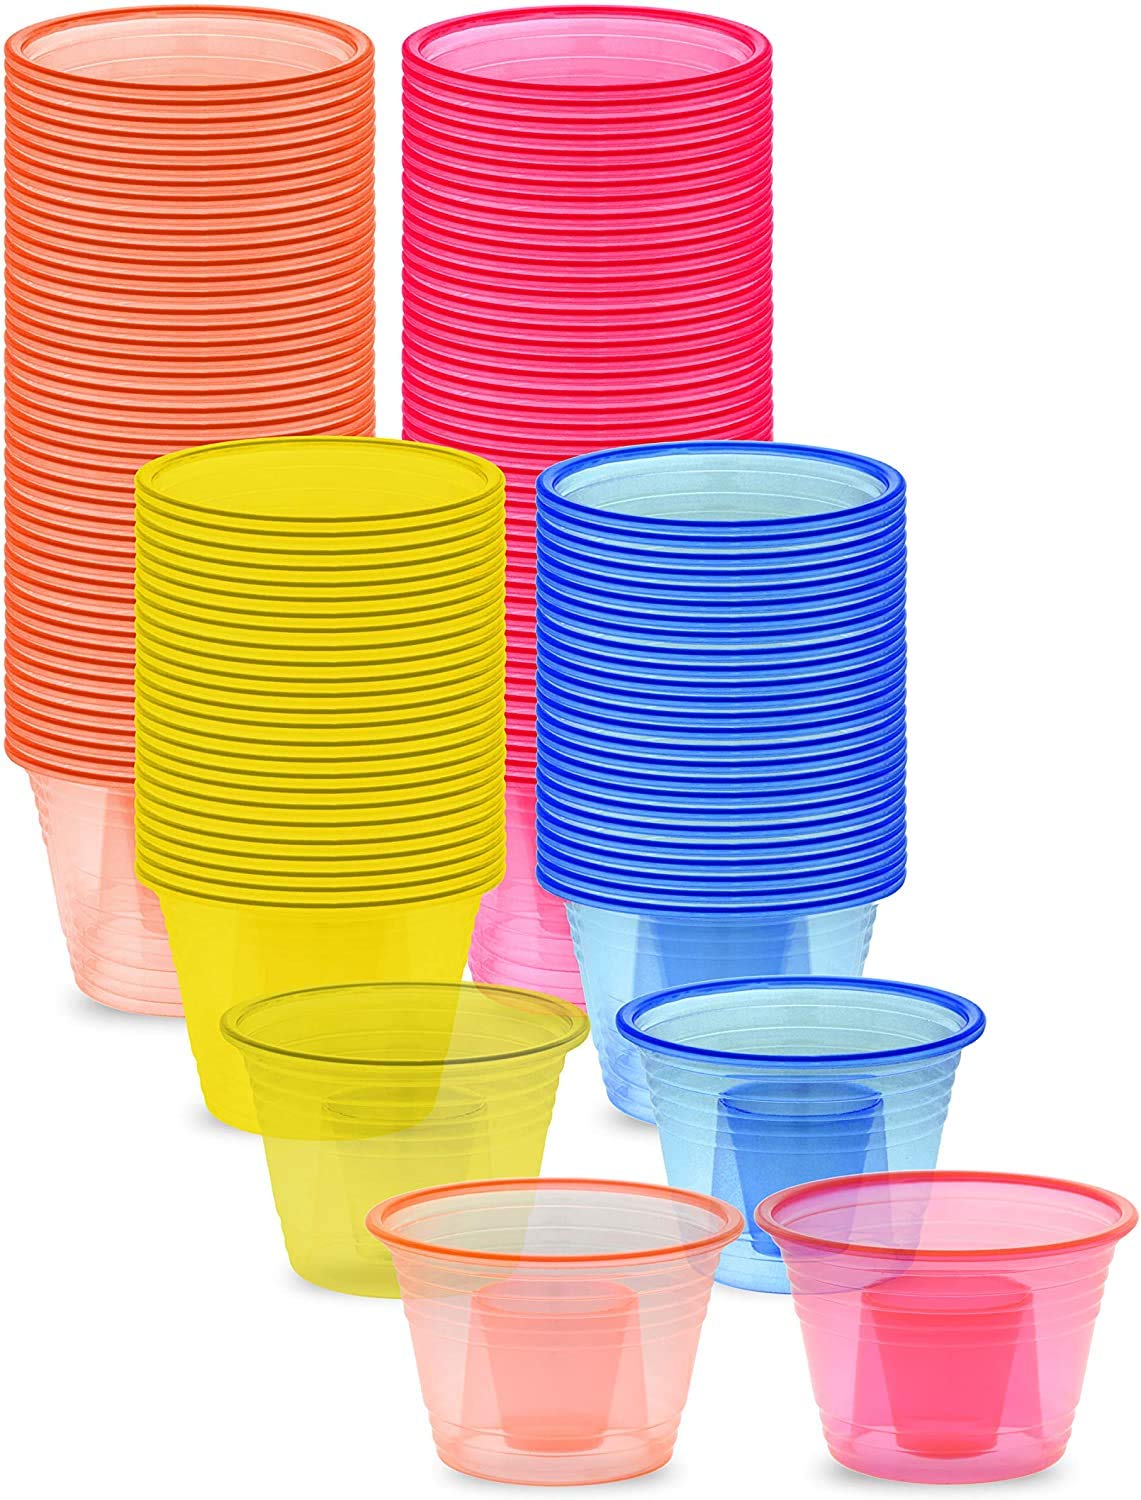 Zappy 500 Red Jager Bomb Cups Disposable Plastic Party Bomber Power Bomber Jager Bomb Cups Cool Double Shot Glass Glasses Shot Cup Cups Jager bomb ...